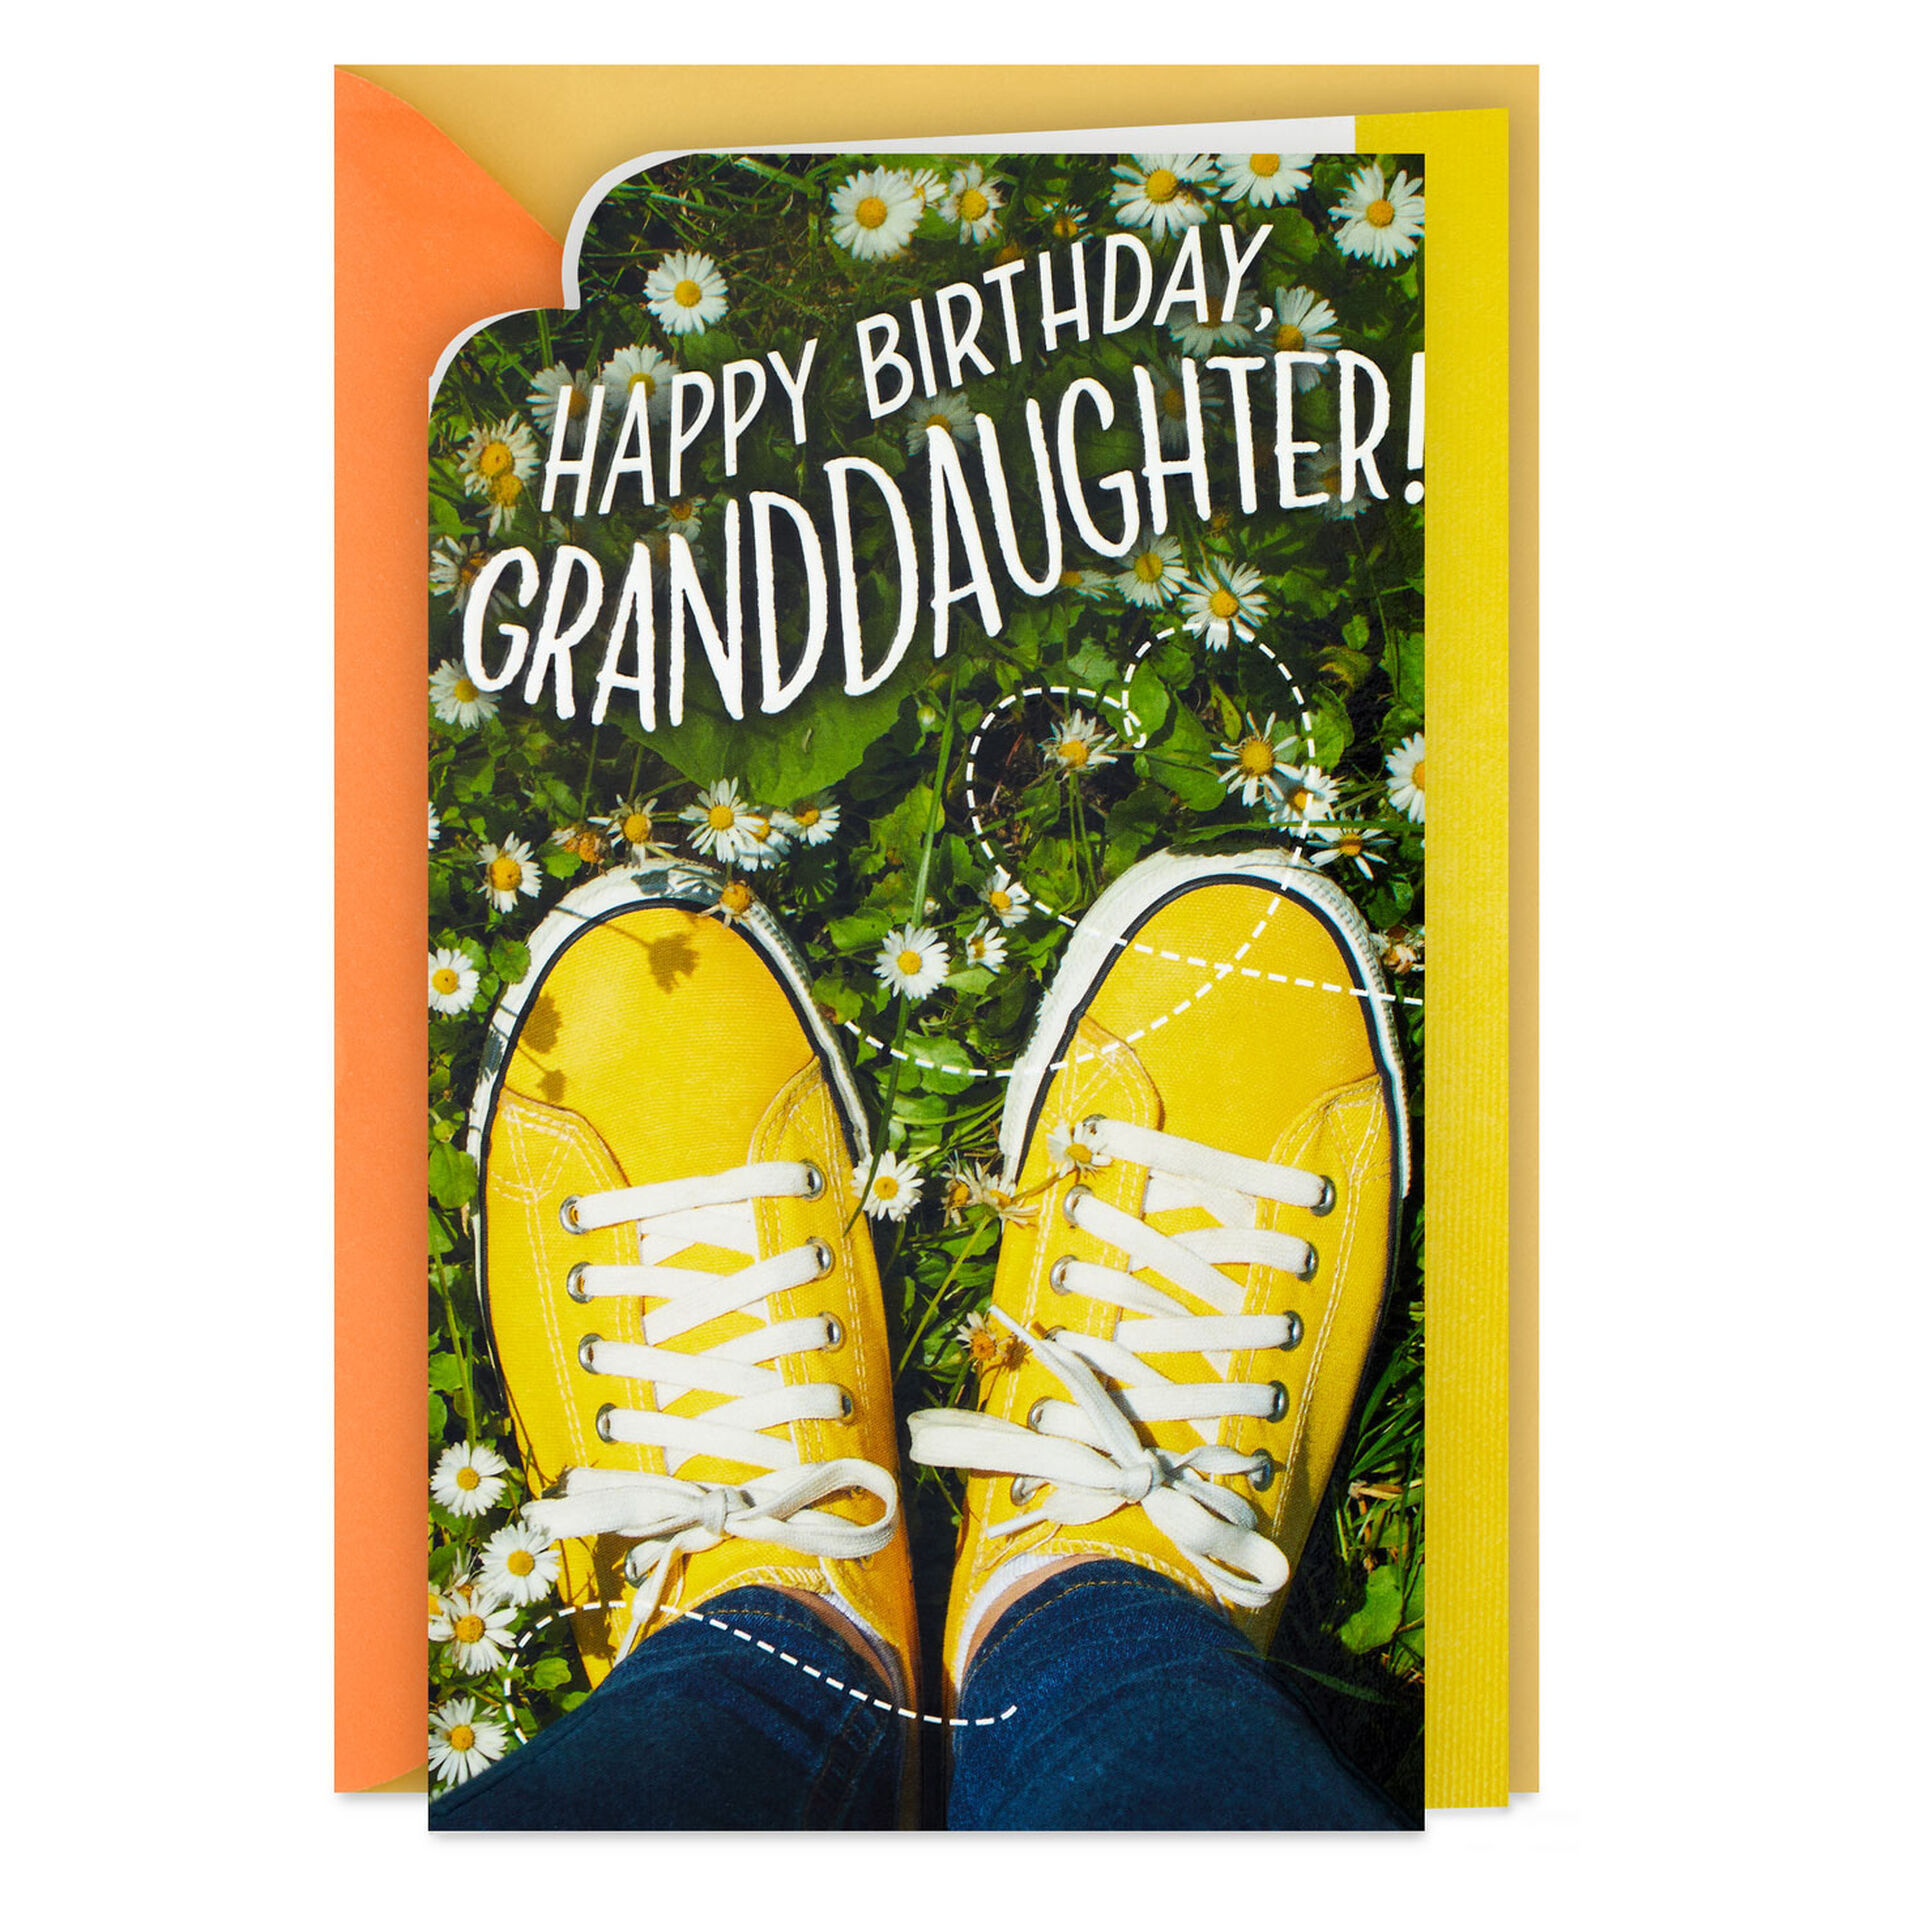 Tennis-Shoes-and-Daisies-Granddaughter-Birthday-Card_399FBD6042_01